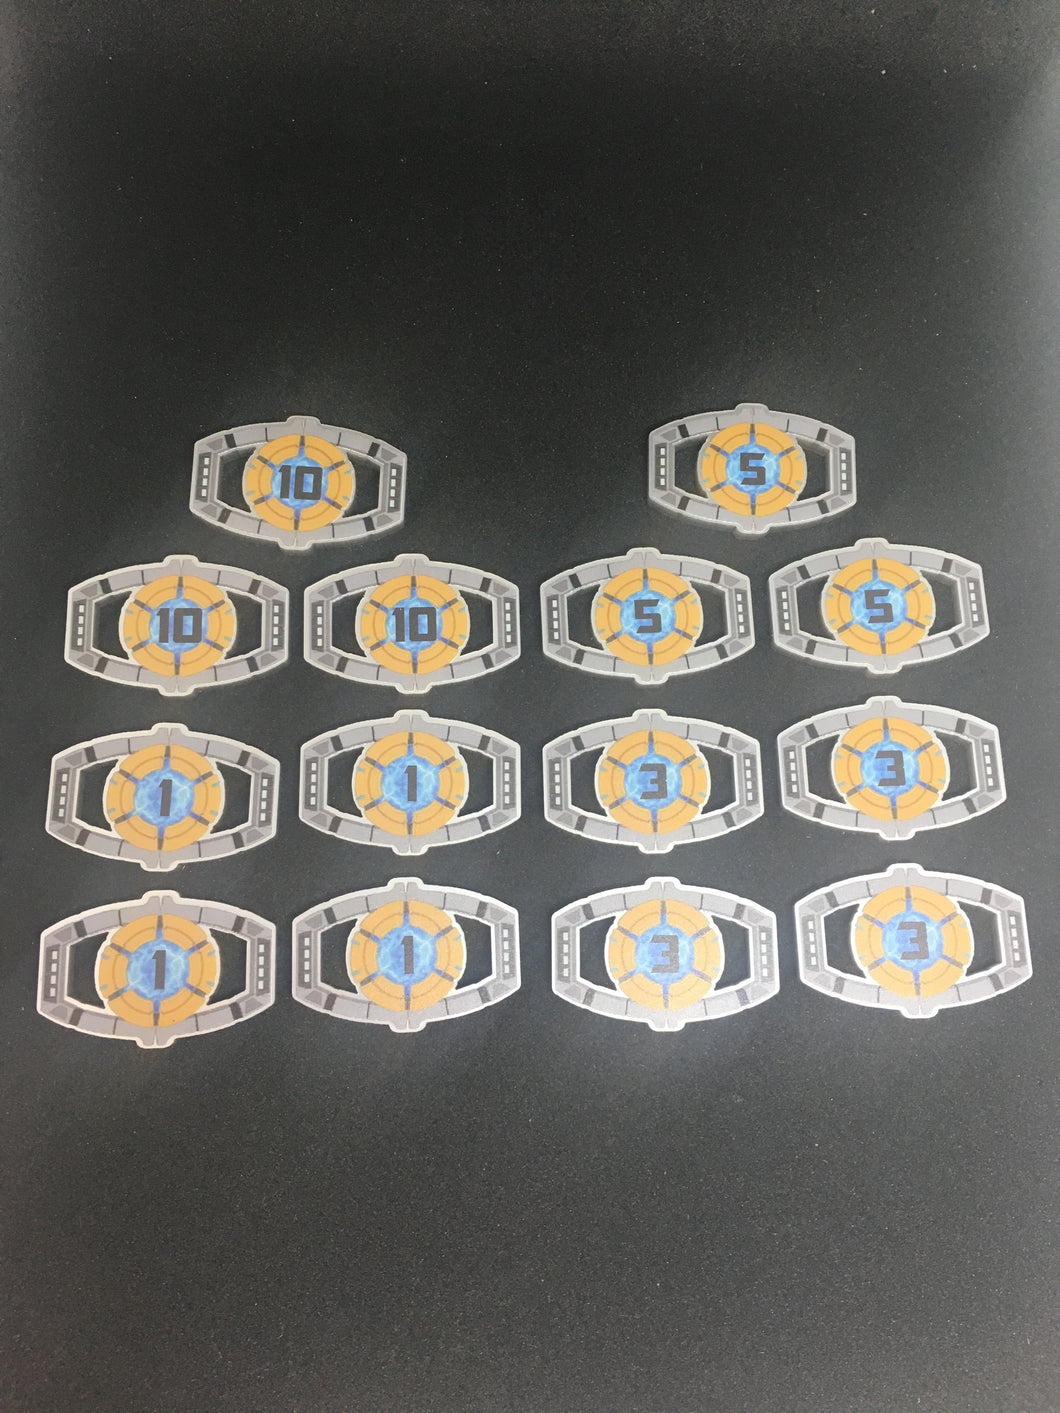 Matrix of leadership style large damage tokens. Colour printed, scratch resistant. Double sided.